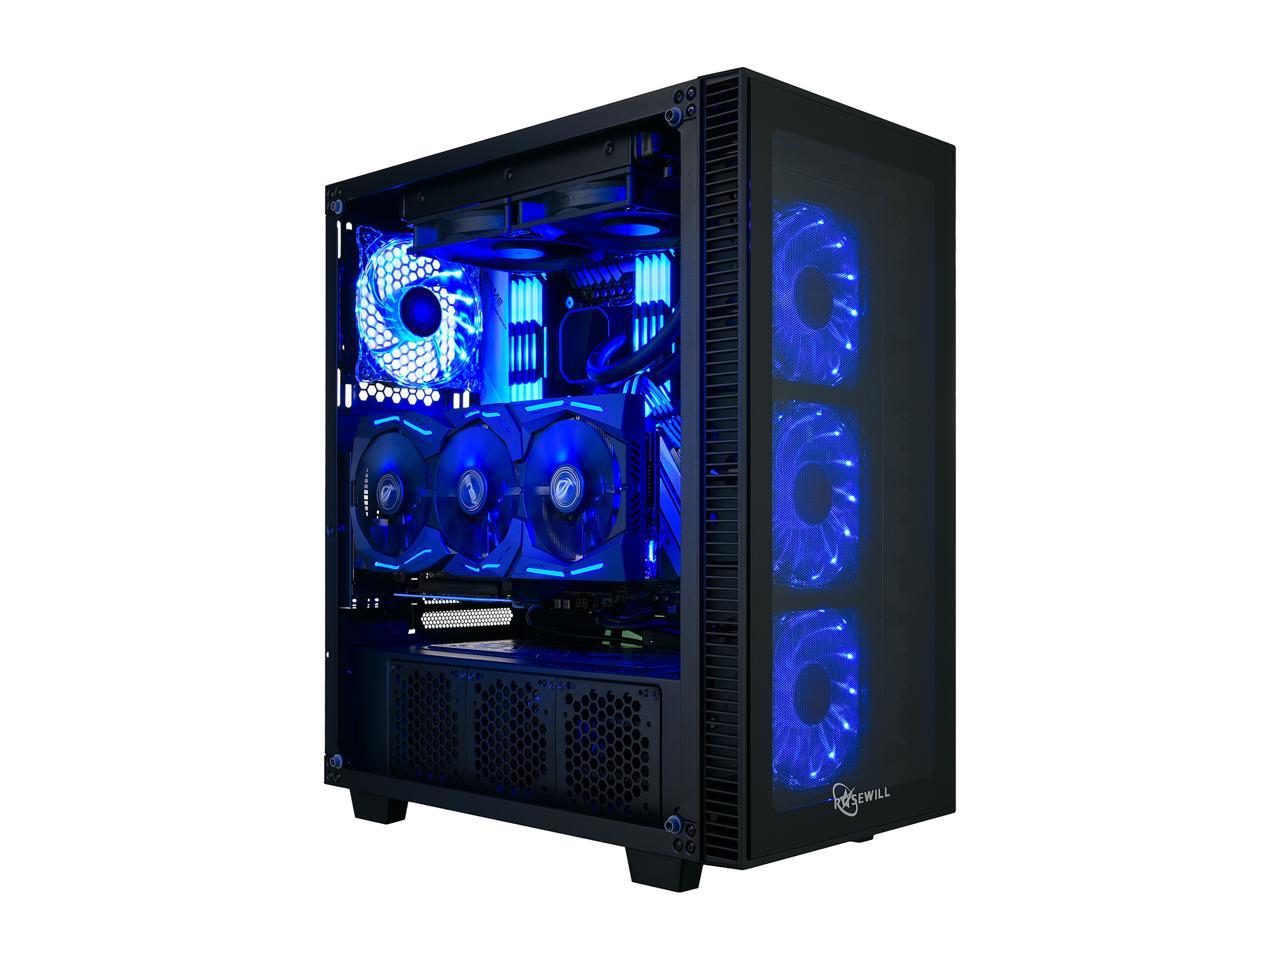 Rosewill Atx Mid Tower Gaming Pc Computer Case With Blue Led Fans - Cullinan Mx-Blue